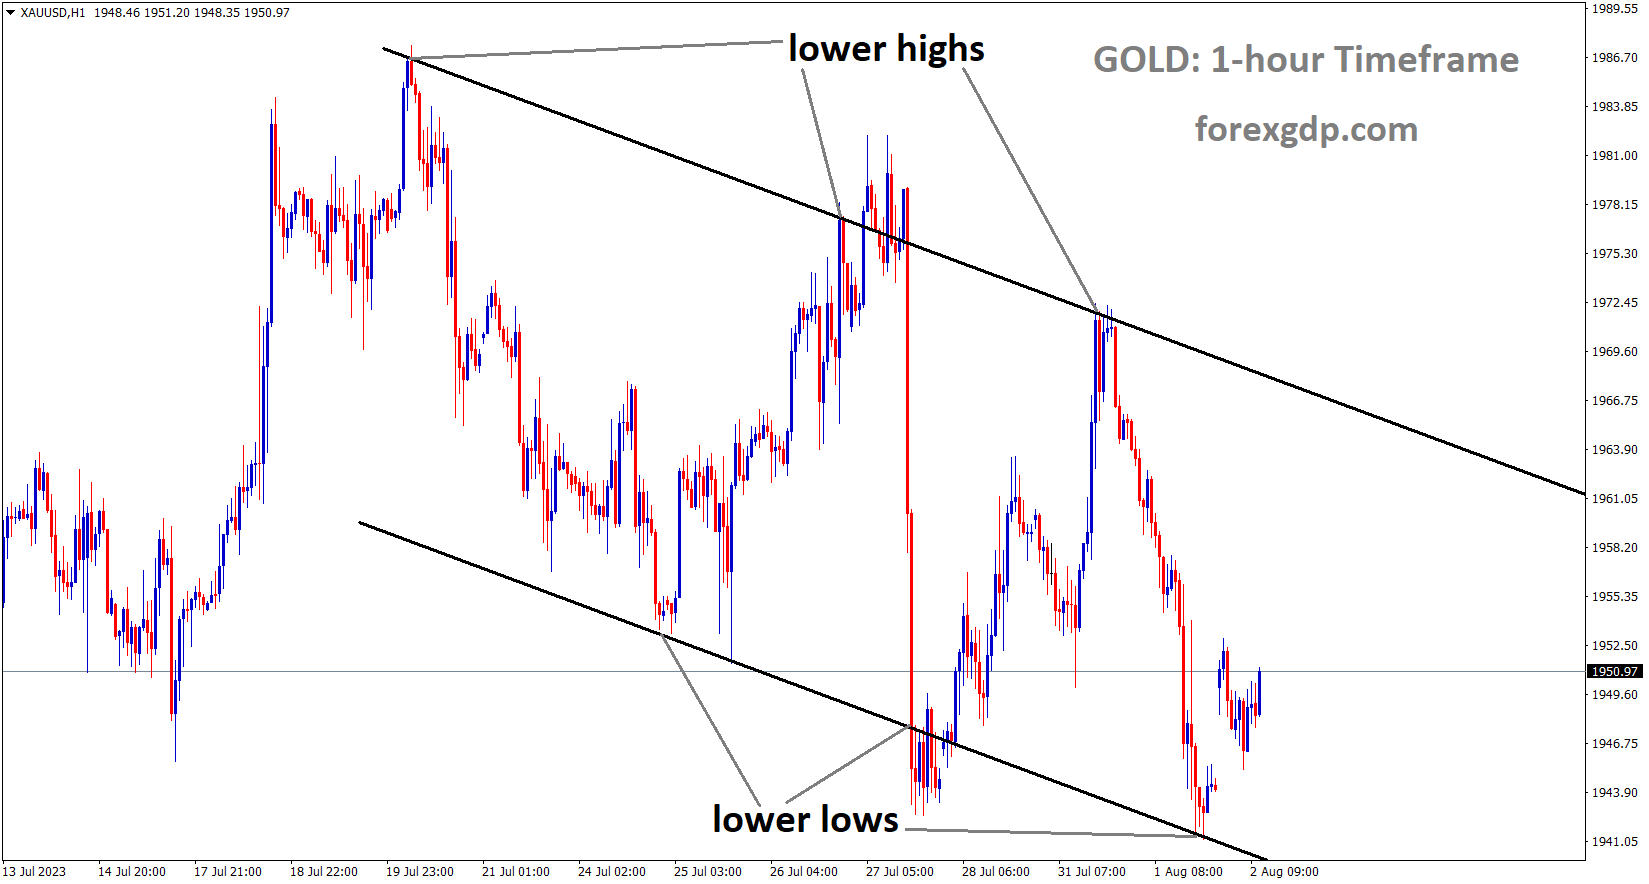 XAUUSD Gold price is moving in the Descending channel and the market has rebounded from the lower low area of the channel